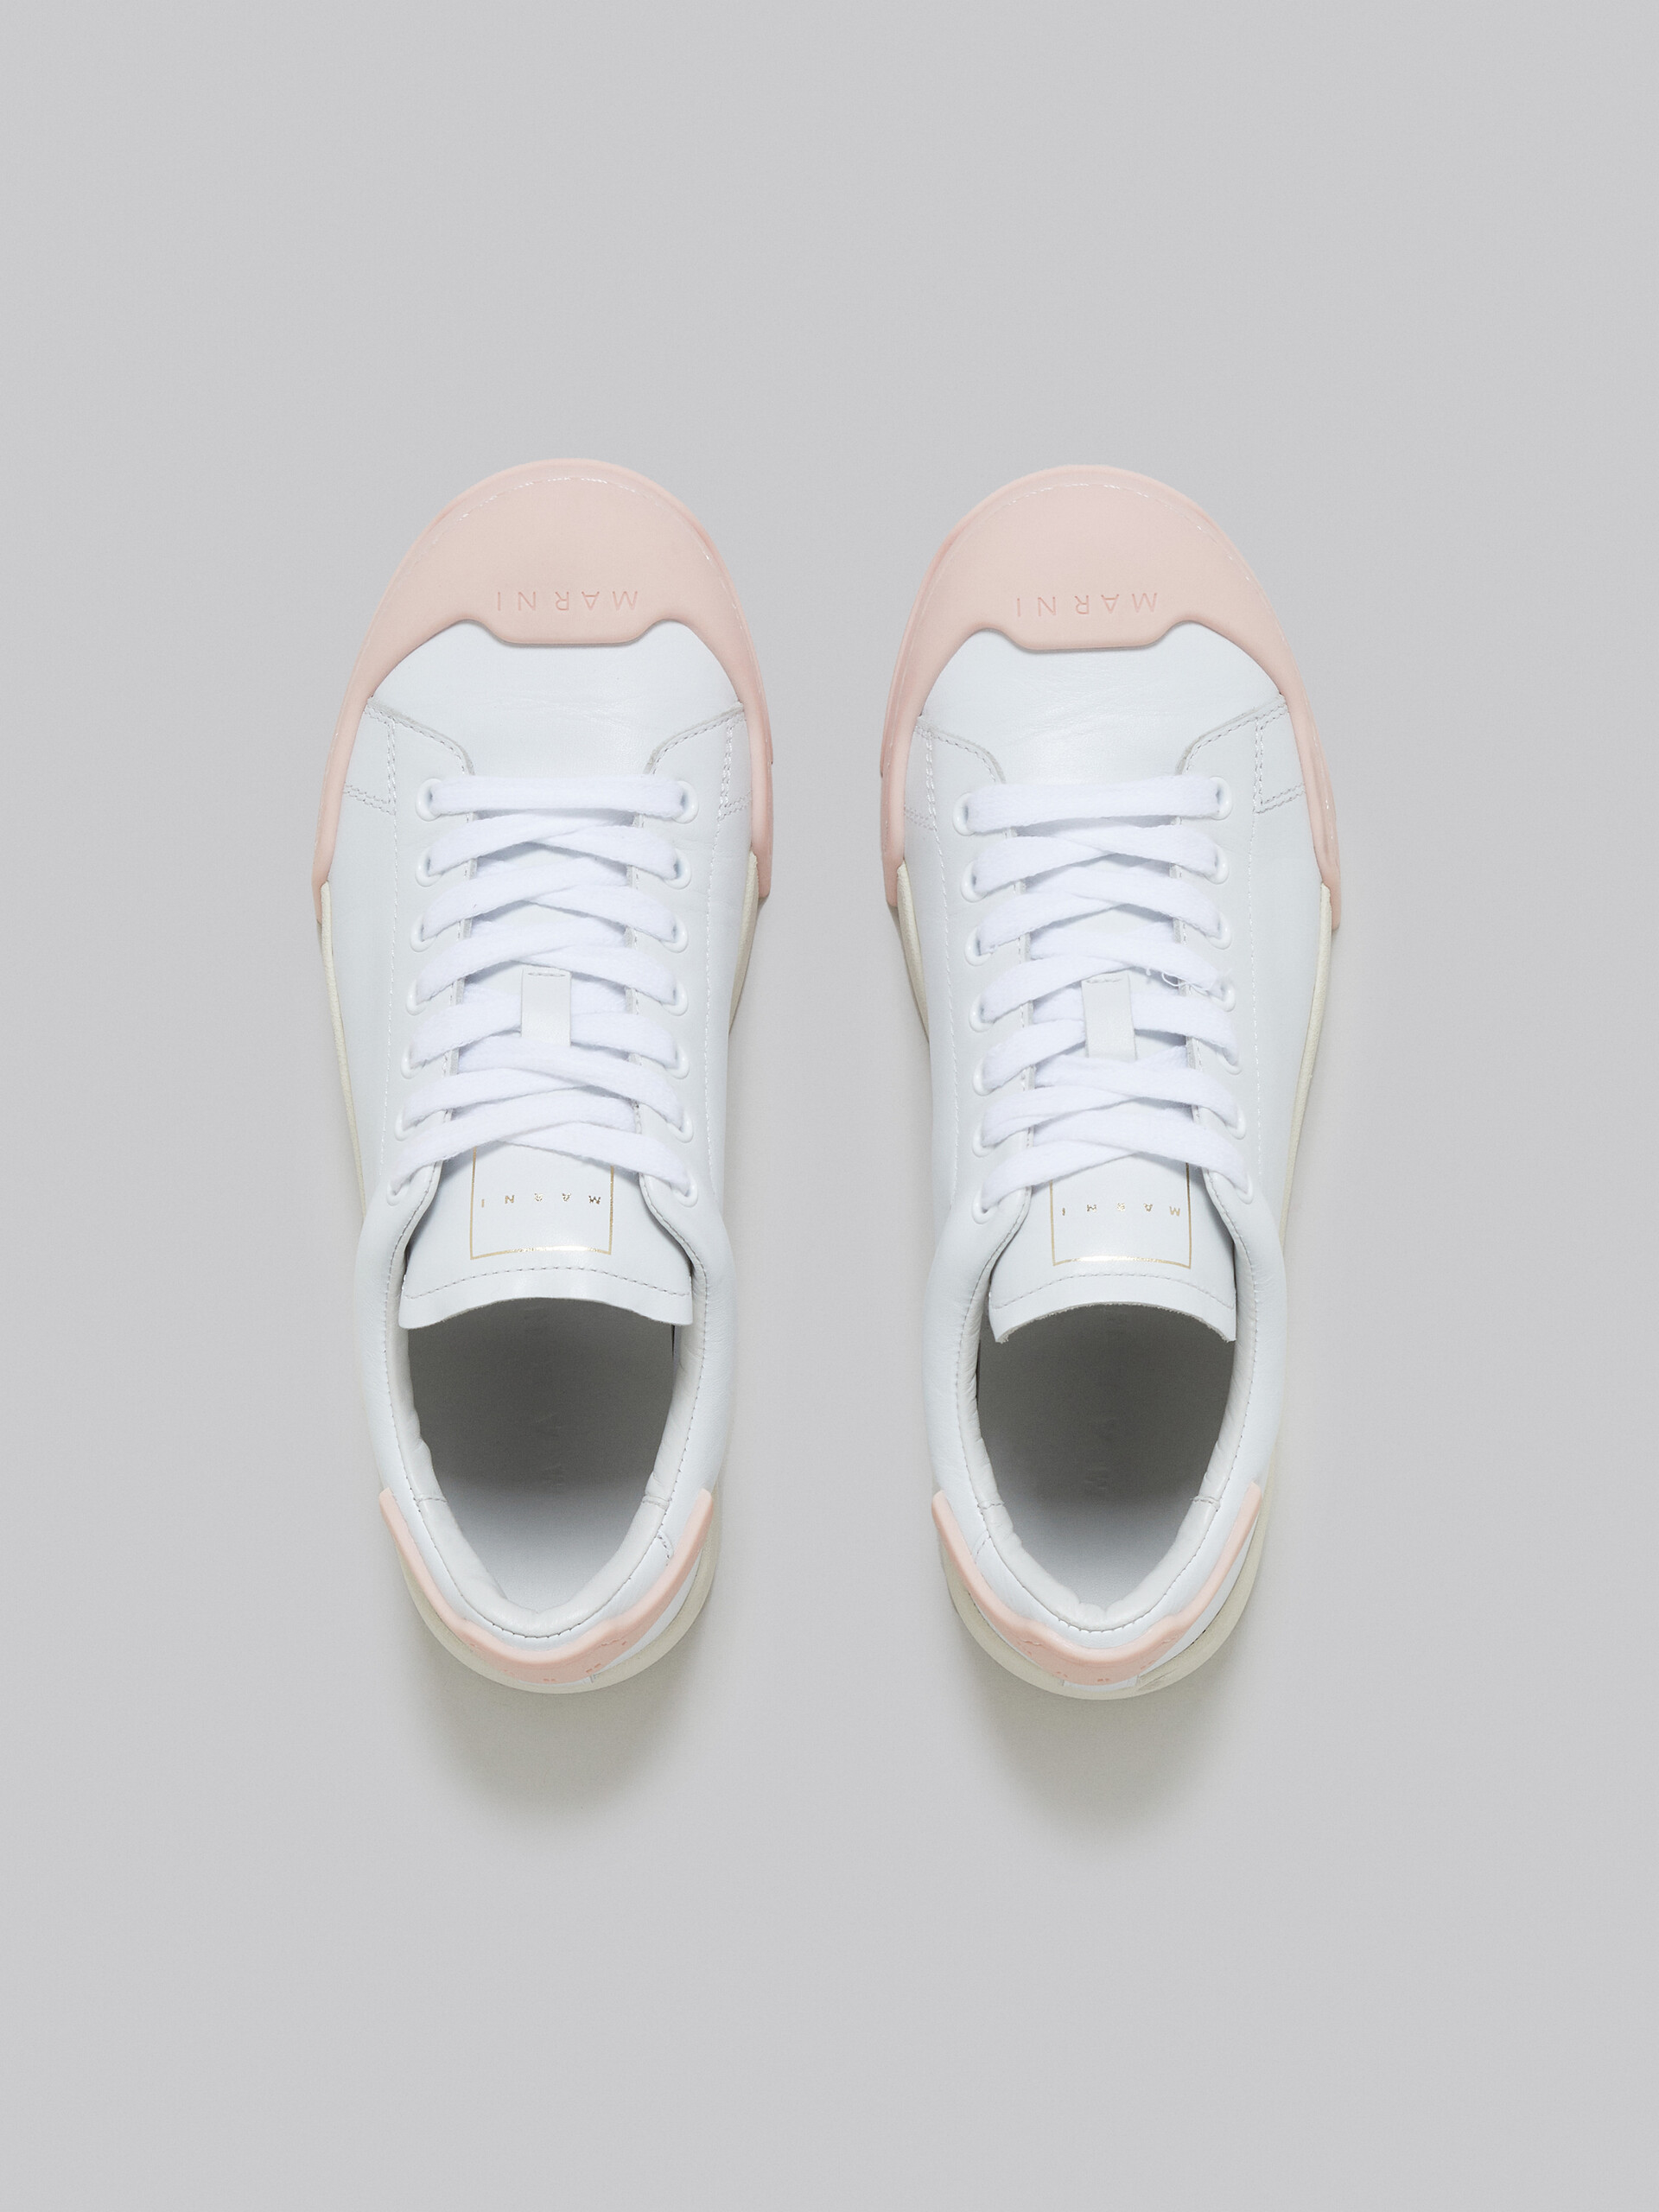 Dada Bumper sneaker in white and pink leather - Sneakers - Image 4